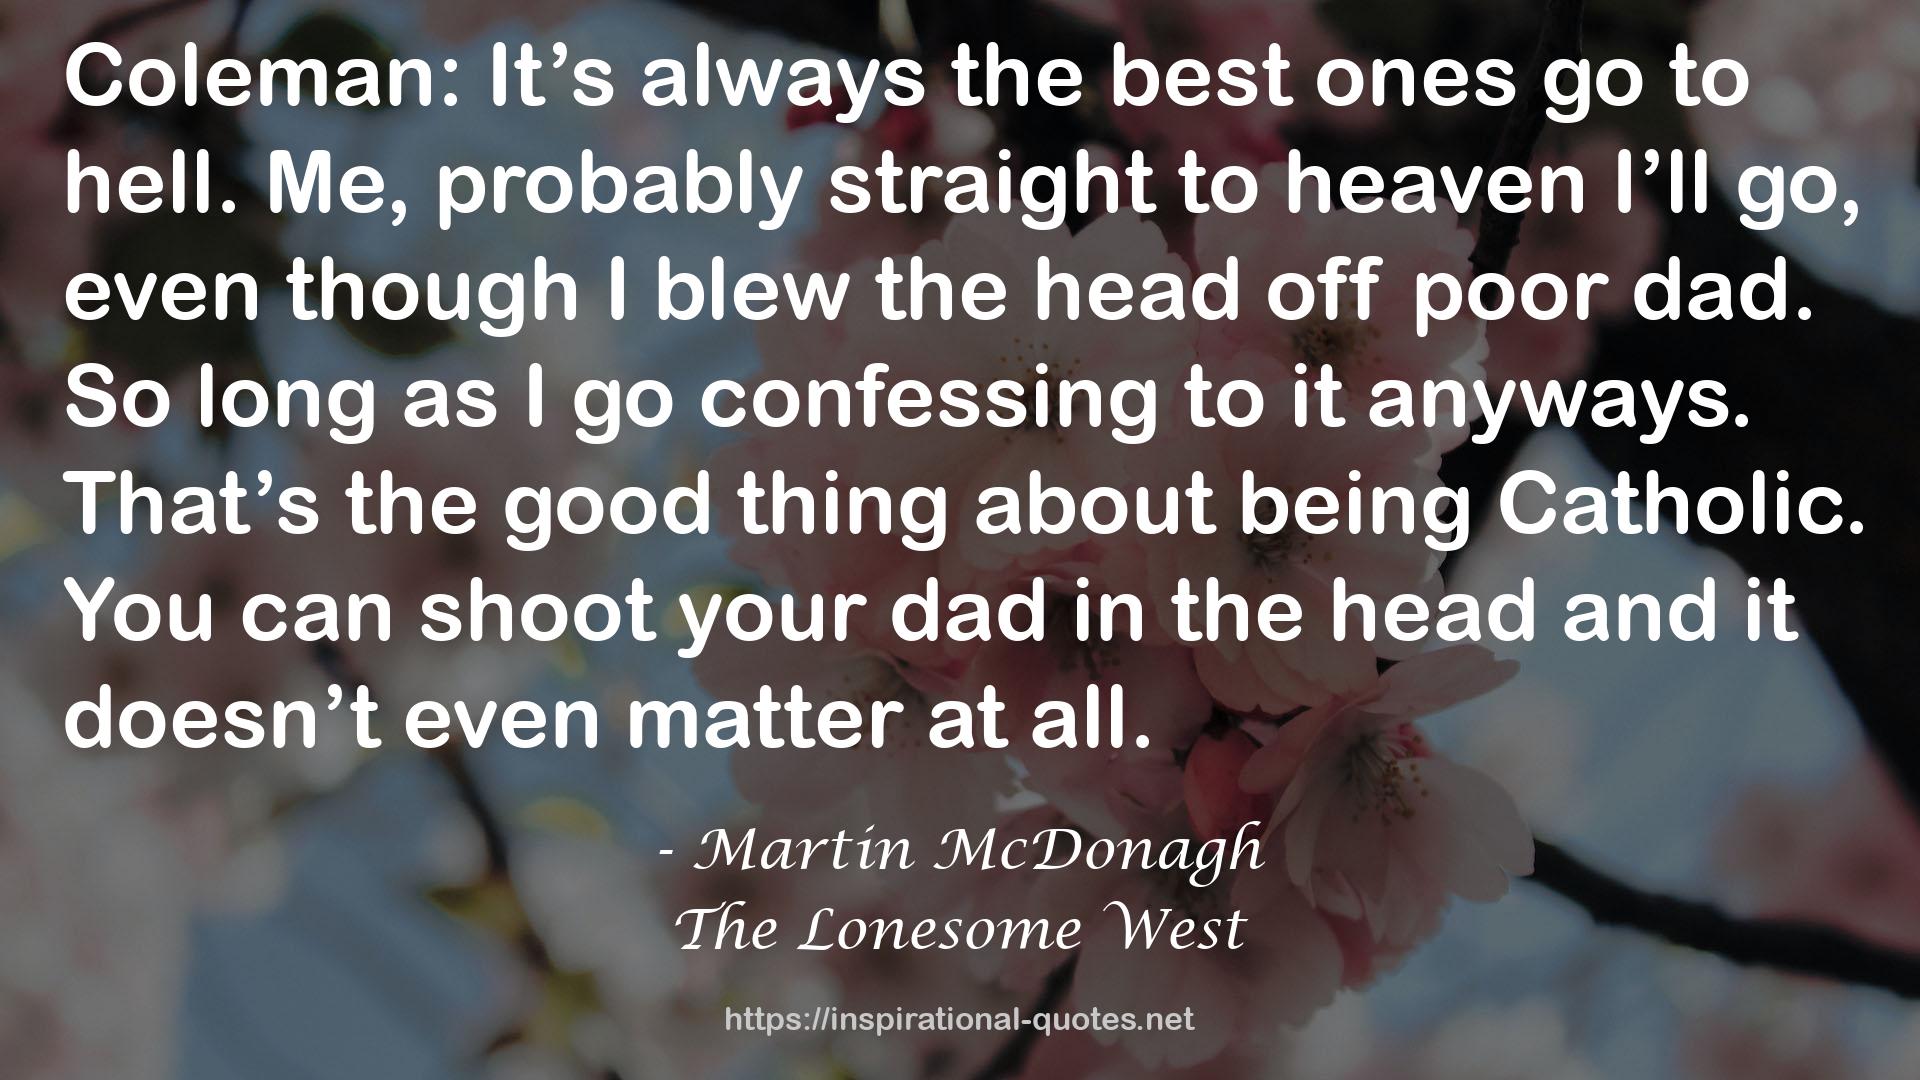 The Lonesome West QUOTES